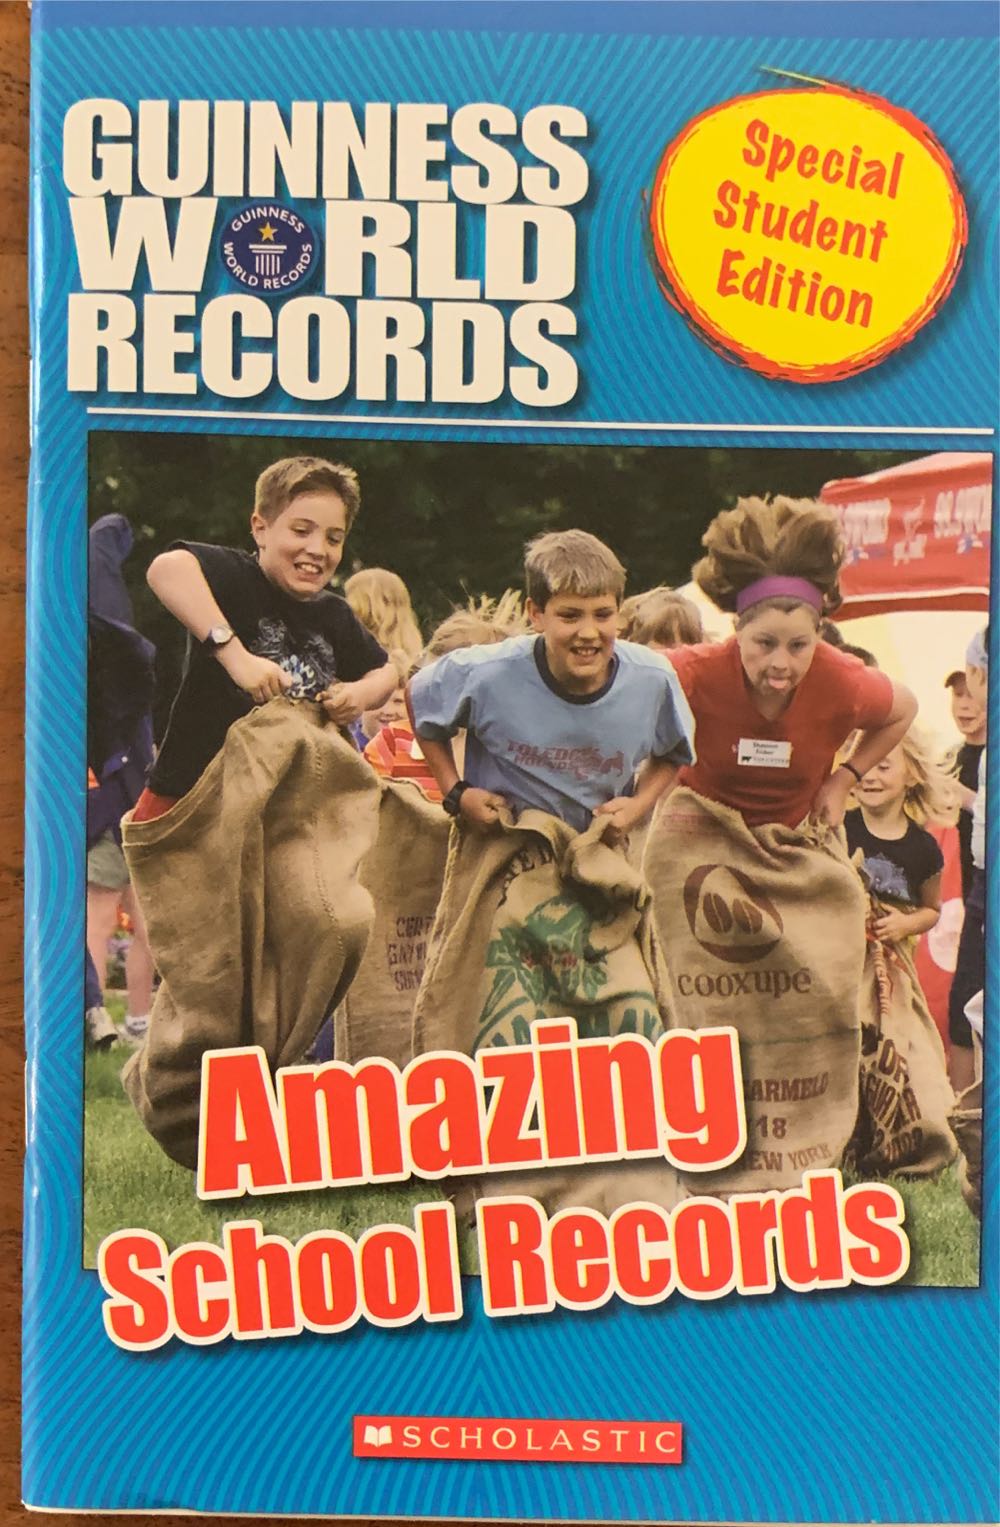 Amazing School Records - GUINNESS WORLD RECORDS (- Paperback) book collectible [Barcode 9780439820578] - Main Image 1